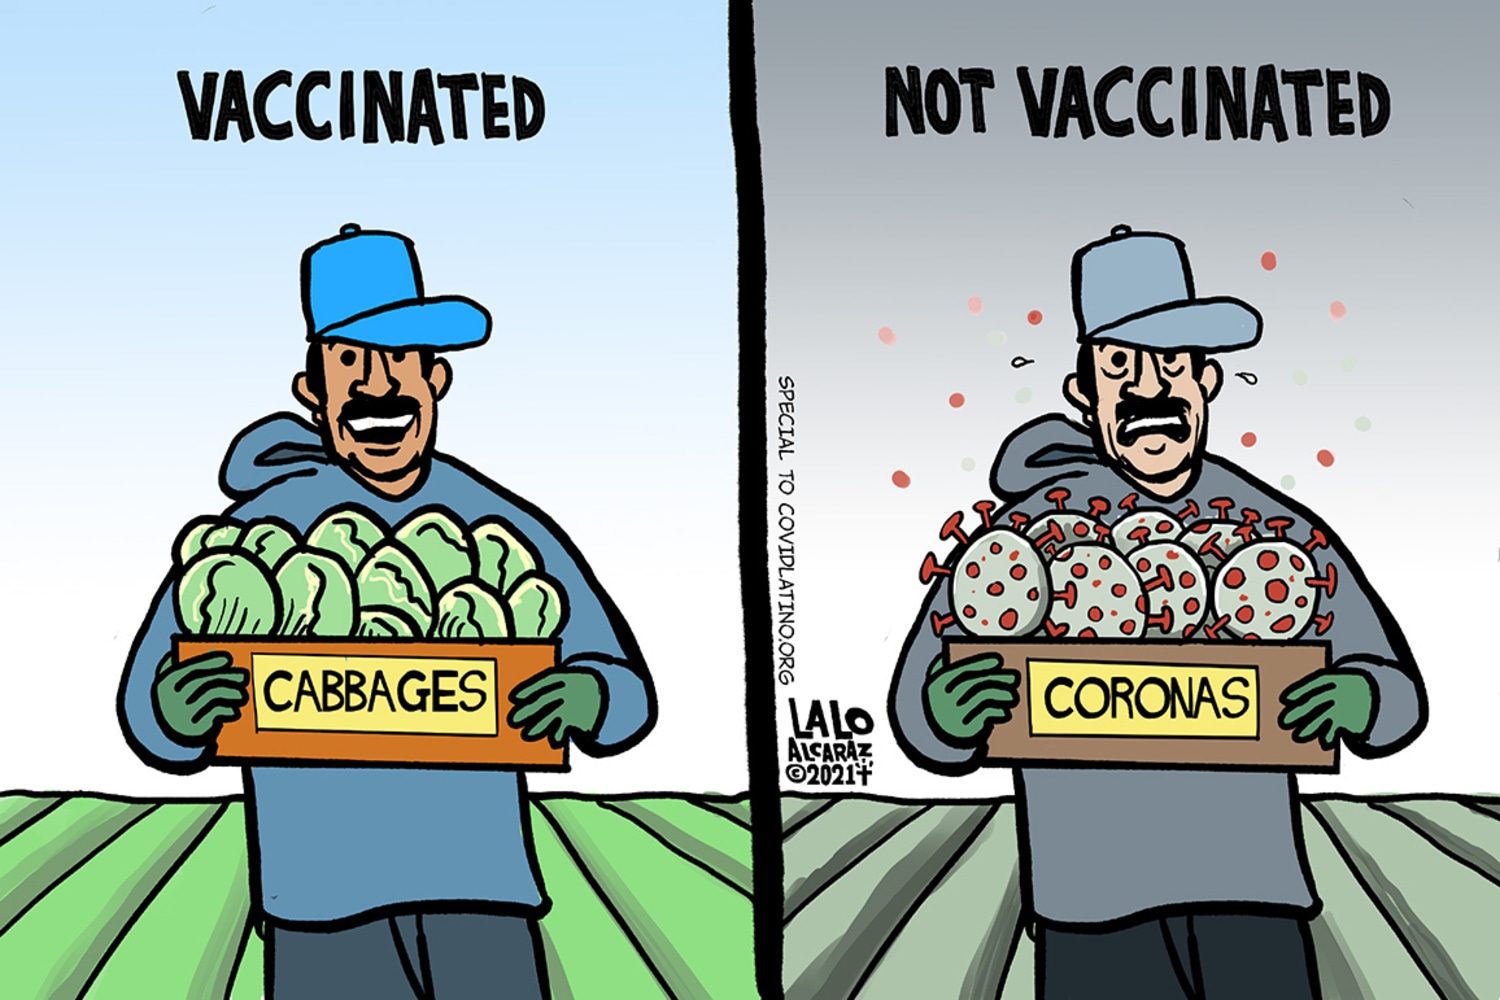 A Latino cartoonist is using his art to encourage vaccinations